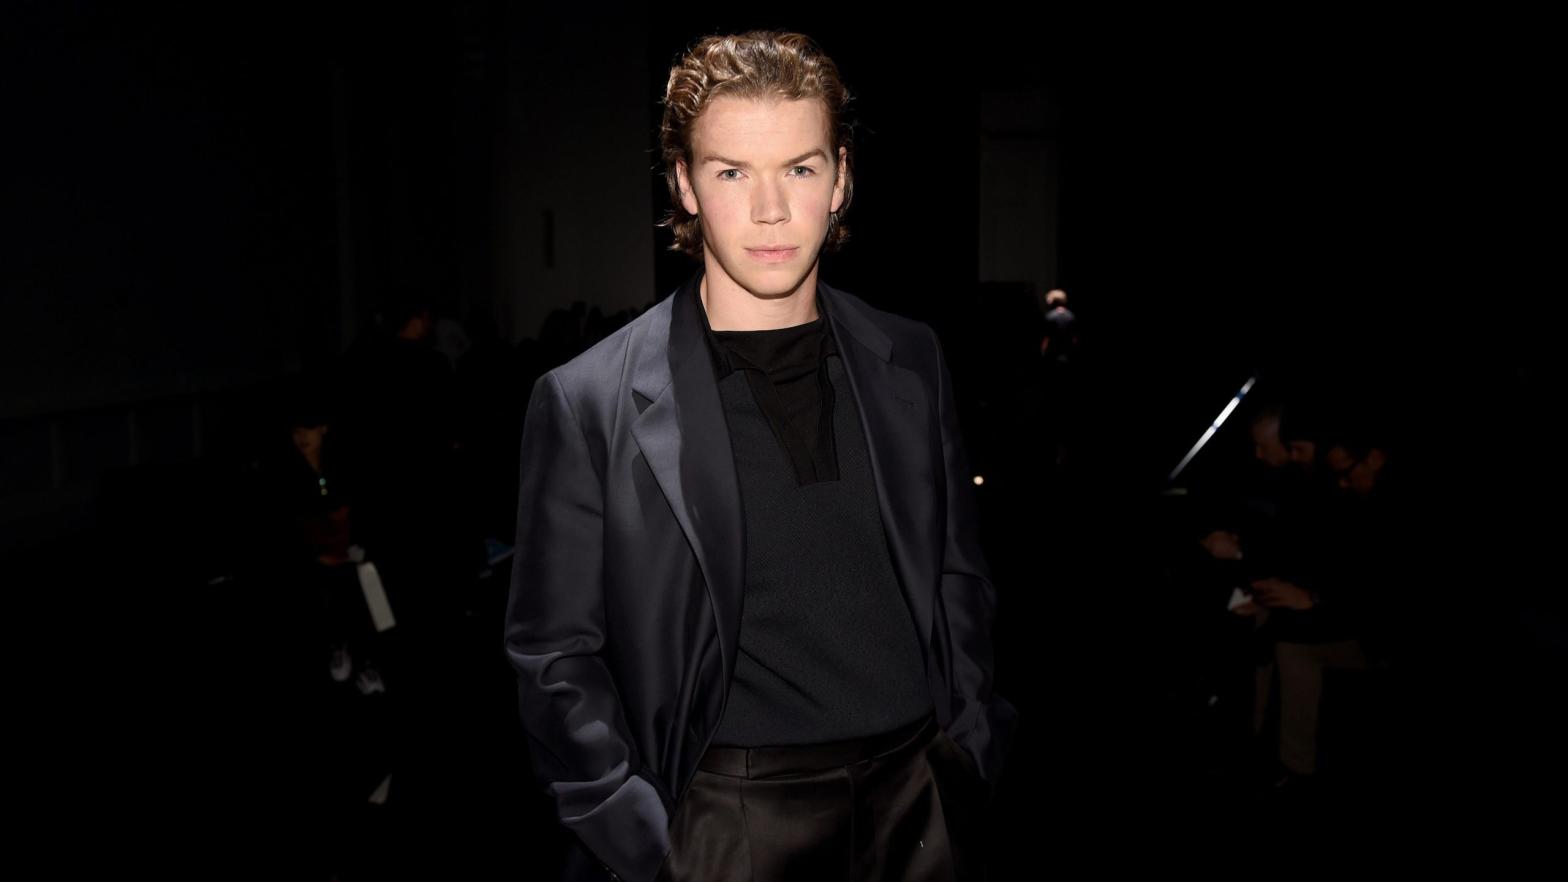 Will Poulter, seen here at Paris Fashion week in 2020, is playing Adam Warlock in Guardians of the Galaxy Vol 3. (Photo: Anthony Ghnassia, Getty Images)